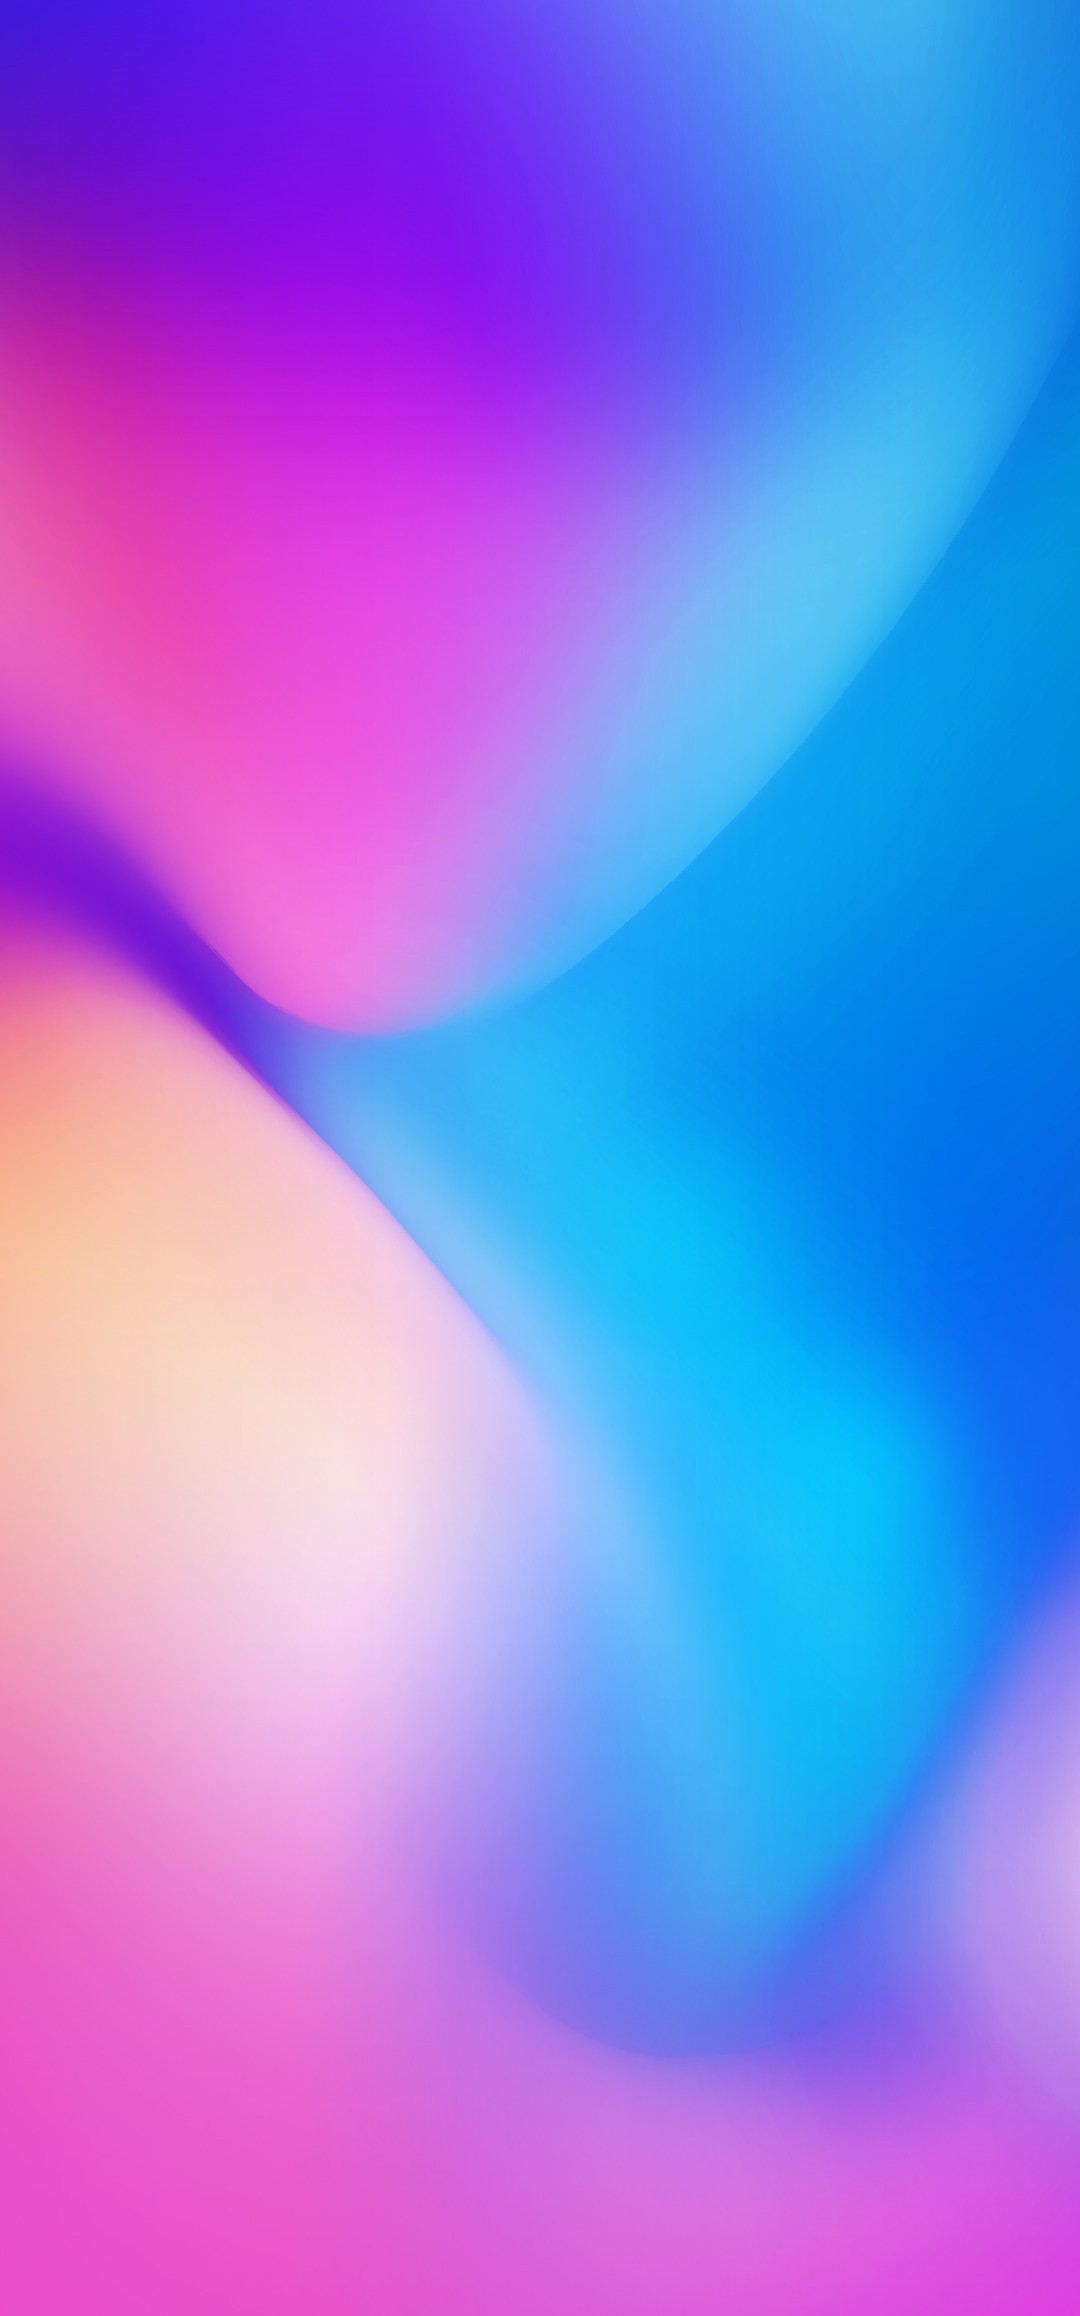 These Wallpapers Can Be Used On Any Android Or Ios - Vivo Nex Wallpaper Hd  - 1080x2316 Wallpaper 